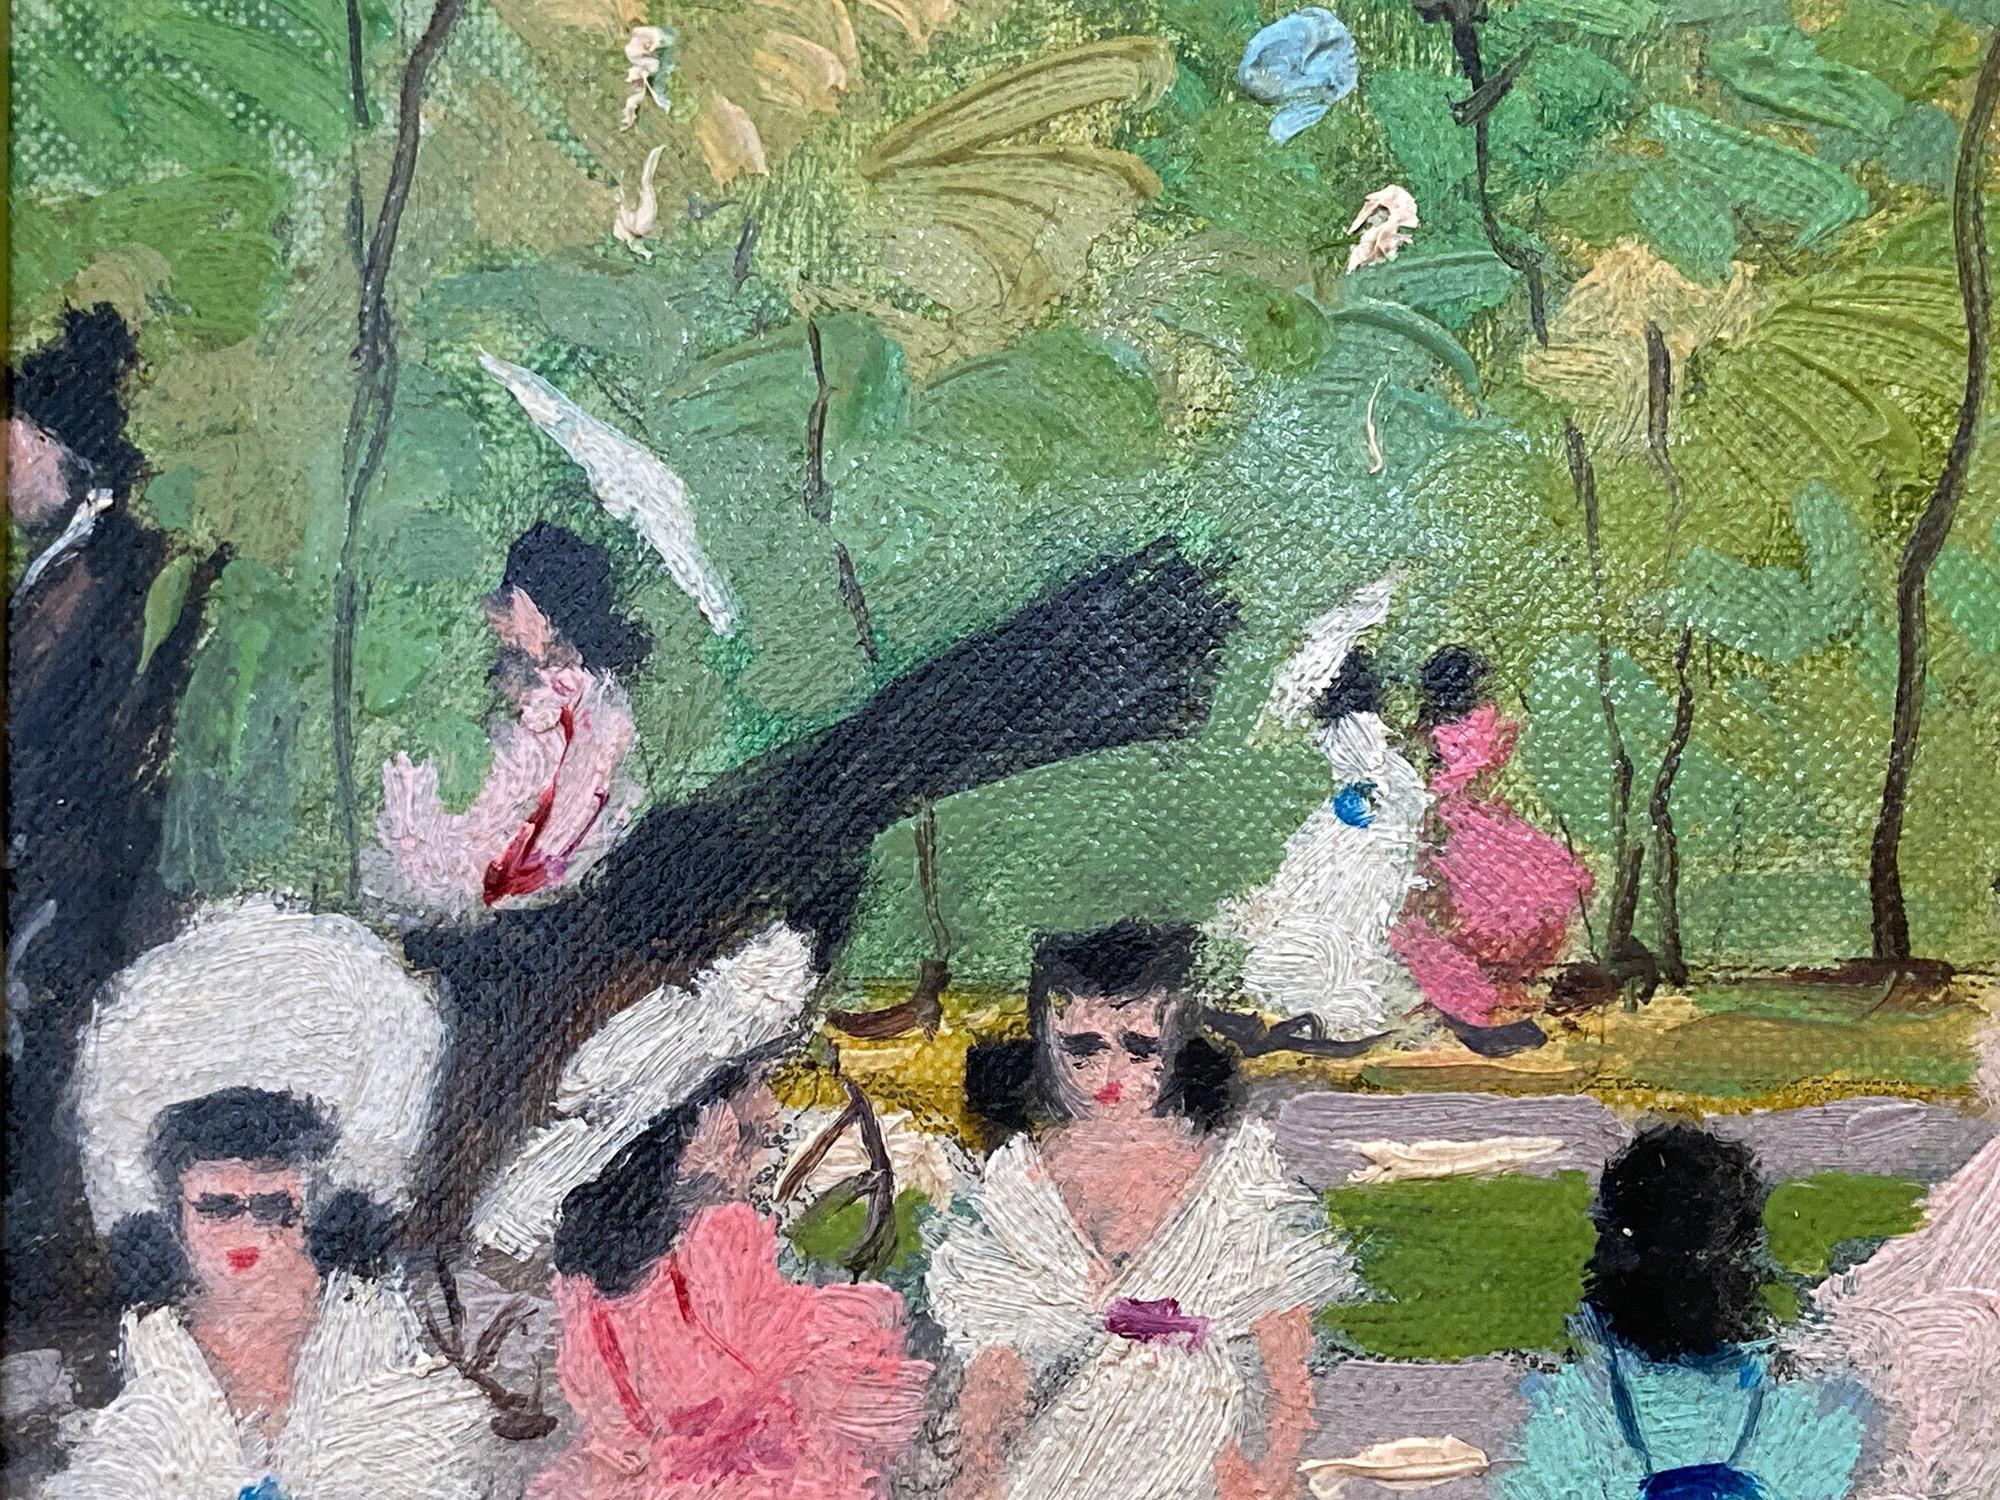 A whimsical oil painting depicting a park scene in Paris during spring by Luigi Cagliani. As an Italian Impressionist artist, most of Cagliani's works were produced in the first half of the 20th Century. He was known for his charming compositions